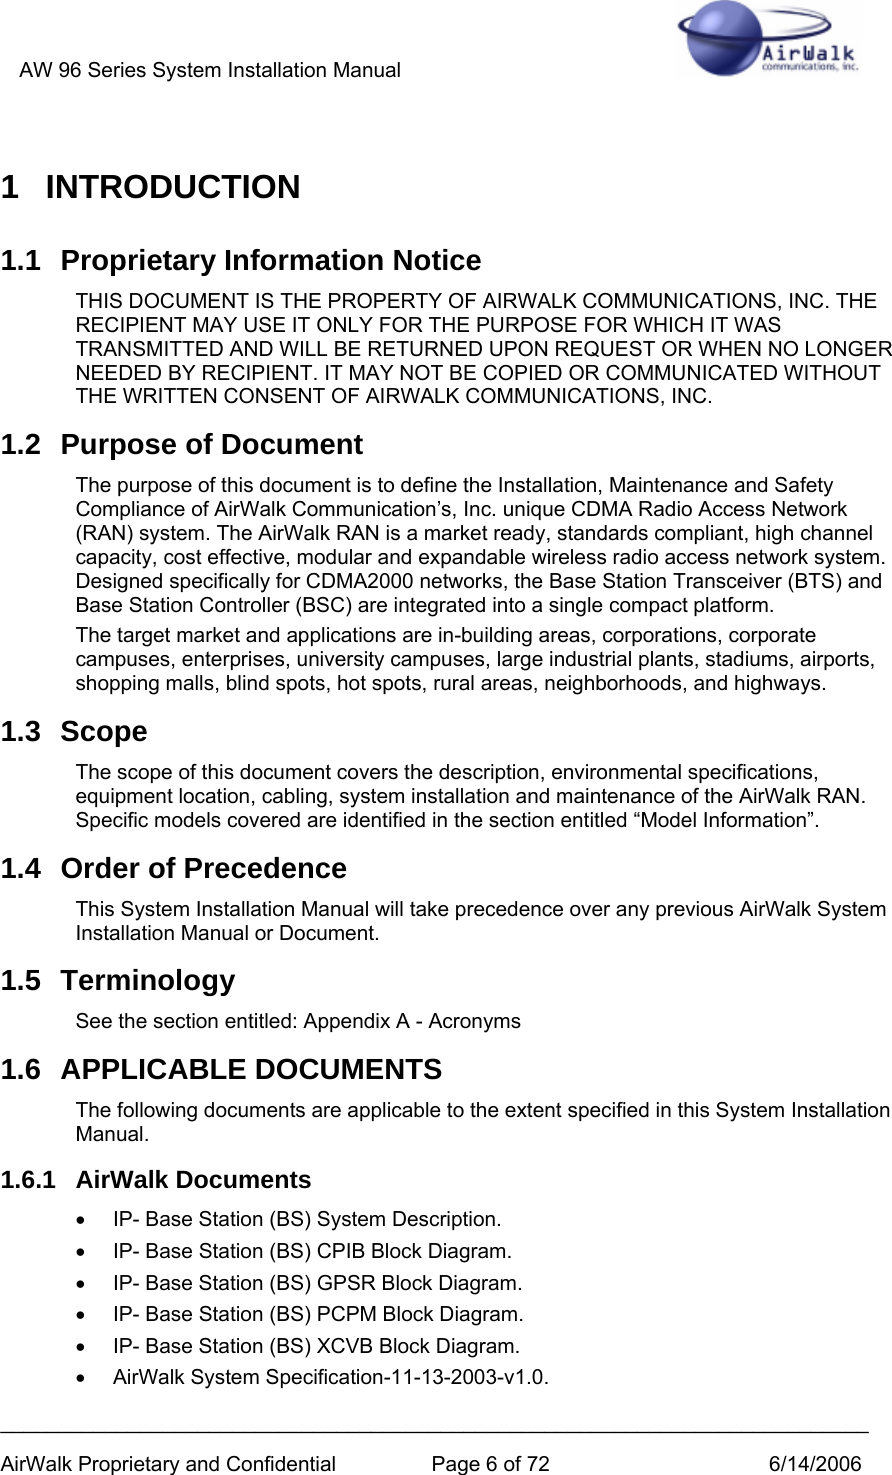 AW 96 Series System Installation Manual          ___________________________________________________________________________ AirWalk Proprietary and Confidential  Page 6 of 72  6/14/2006 1 INTRODUCTION 1.1  Proprietary Information Notice THIS DOCUMENT IS THE PROPERTY OF AIRWALK COMMUNICATIONS, INC. THE RECIPIENT MAY USE IT ONLY FOR THE PURPOSE FOR WHICH IT WAS TRANSMITTED AND WILL BE RETURNED UPON REQUEST OR WHEN NO LONGER NEEDED BY RECIPIENT. IT MAY NOT BE COPIED OR COMMUNICATED WITHOUT THE WRITTEN CONSENT OF AIRWALK COMMUNICATIONS, INC. 1.2  Purpose of Document The purpose of this document is to define the Installation, Maintenance and Safety Compliance of AirWalk Communication’s, Inc. unique CDMA Radio Access Network (RAN) system. The AirWalk RAN is a market ready, standards compliant, high channel capacity, cost effective, modular and expandable wireless radio access network system. Designed specifically for CDMA2000 networks, the Base Station Transceiver (BTS) and Base Station Controller (BSC) are integrated into a single compact platform. The target market and applications are in-building areas, corporations, corporate campuses, enterprises, university campuses, large industrial plants, stadiums, airports, shopping malls, blind spots, hot spots, rural areas, neighborhoods, and highways. 1.3 Scope The scope of this document covers the description, environmental specifications, equipment location, cabling, system installation and maintenance of the AirWalk RAN. Specific models covered are identified in the section entitled “Model Information”. 1.4  Order of Precedence This System Installation Manual will take precedence over any previous AirWalk System Installation Manual or Document. 1.5 Terminology See the section entitled: Appendix A - Acronyms 1.6 APPLICABLE DOCUMENTS The following documents are applicable to the extent specified in this System Installation Manual. 1.6.1 AirWalk Documents •  IP- Base Station (BS) System Description. •  IP- Base Station (BS) CPIB Block Diagram. •  IP- Base Station (BS) GPSR Block Diagram. •  IP- Base Station (BS) PCPM Block Diagram. •  IP- Base Station (BS) XCVB Block Diagram. •  AirWalk System Specification-11-13-2003-v1.0. 